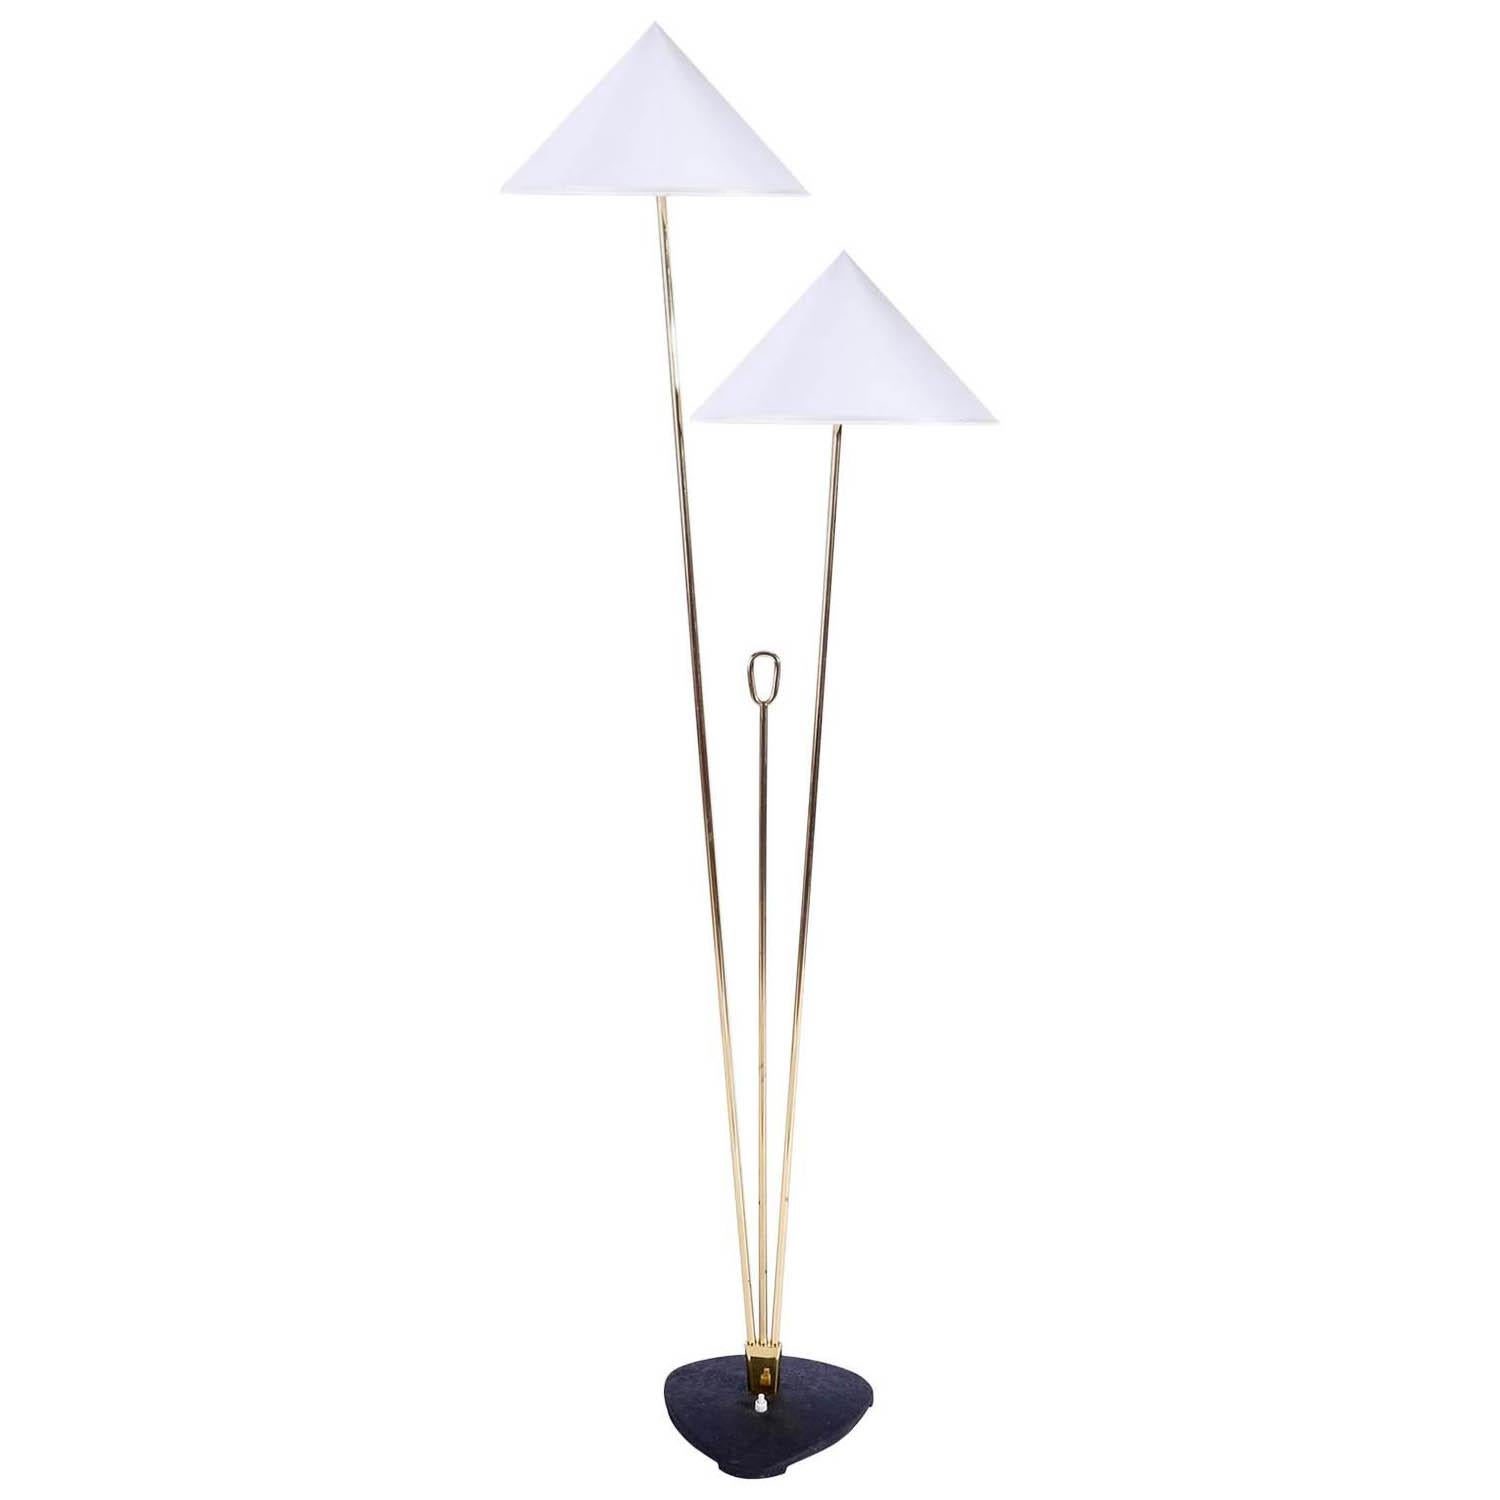 Two brass floor lamps with cone shaped lampshades by Rupert Nikoll, Vienna, Austria, manufactured in midcentury, circa 1960 (late 1950s or early 1960s). 
The stand is made of two brass rods in different lengths, a shorter brass rod with a handle,